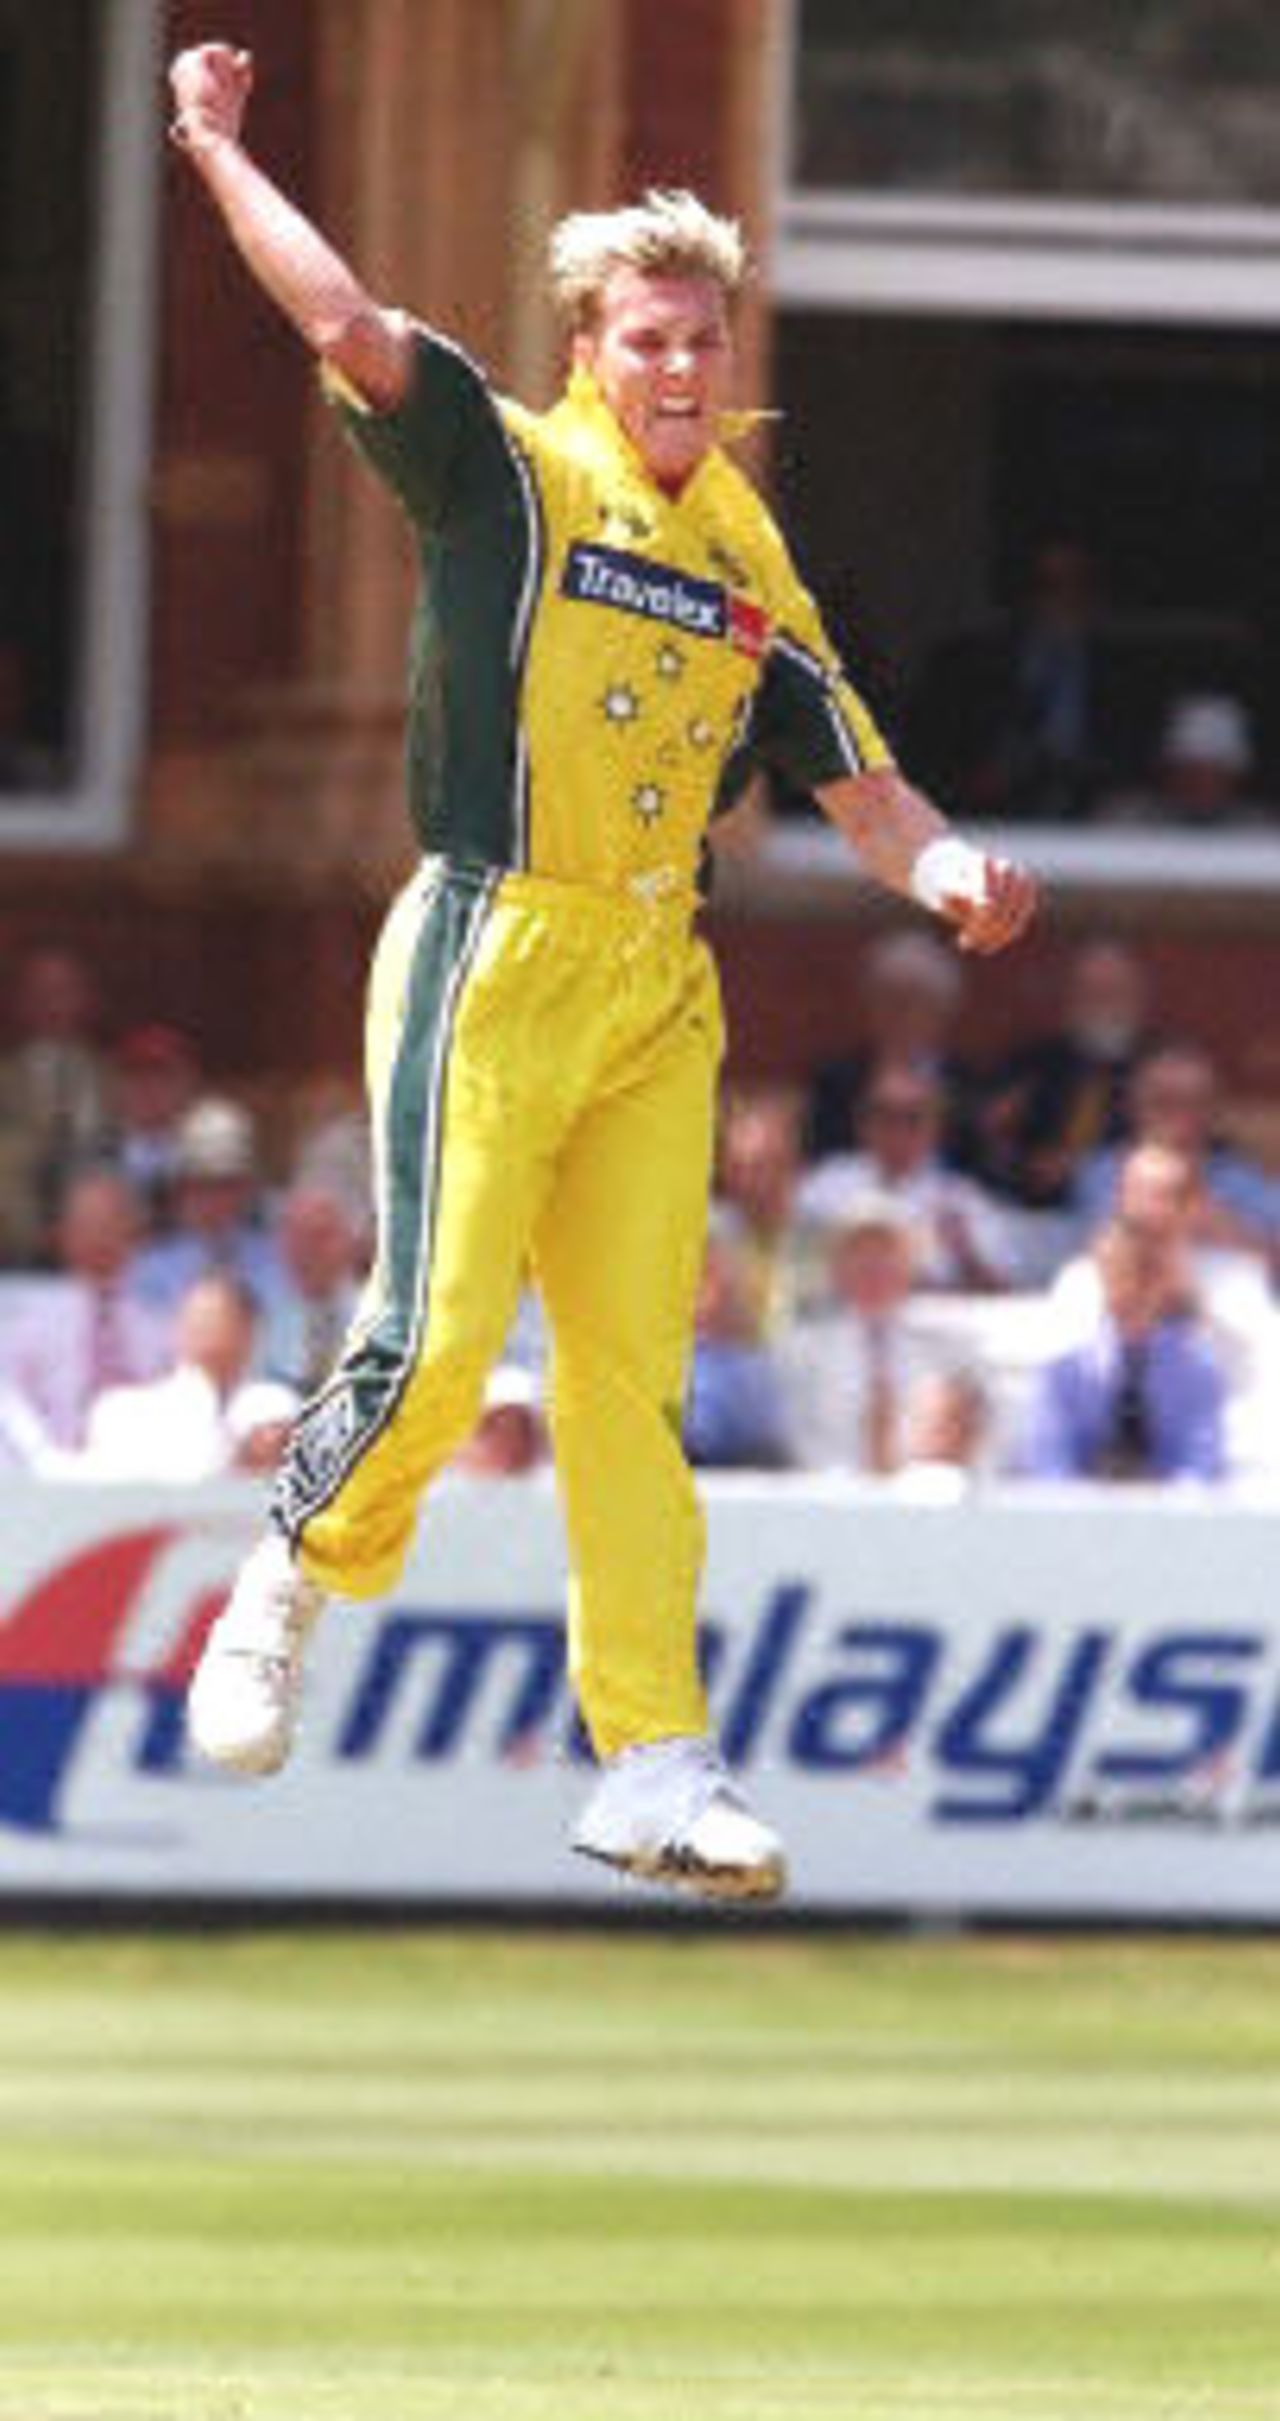 Brett Lee leaps high in the air after dismissing Abdur Razzaq, final ODI at Lords, 23 June 2001.